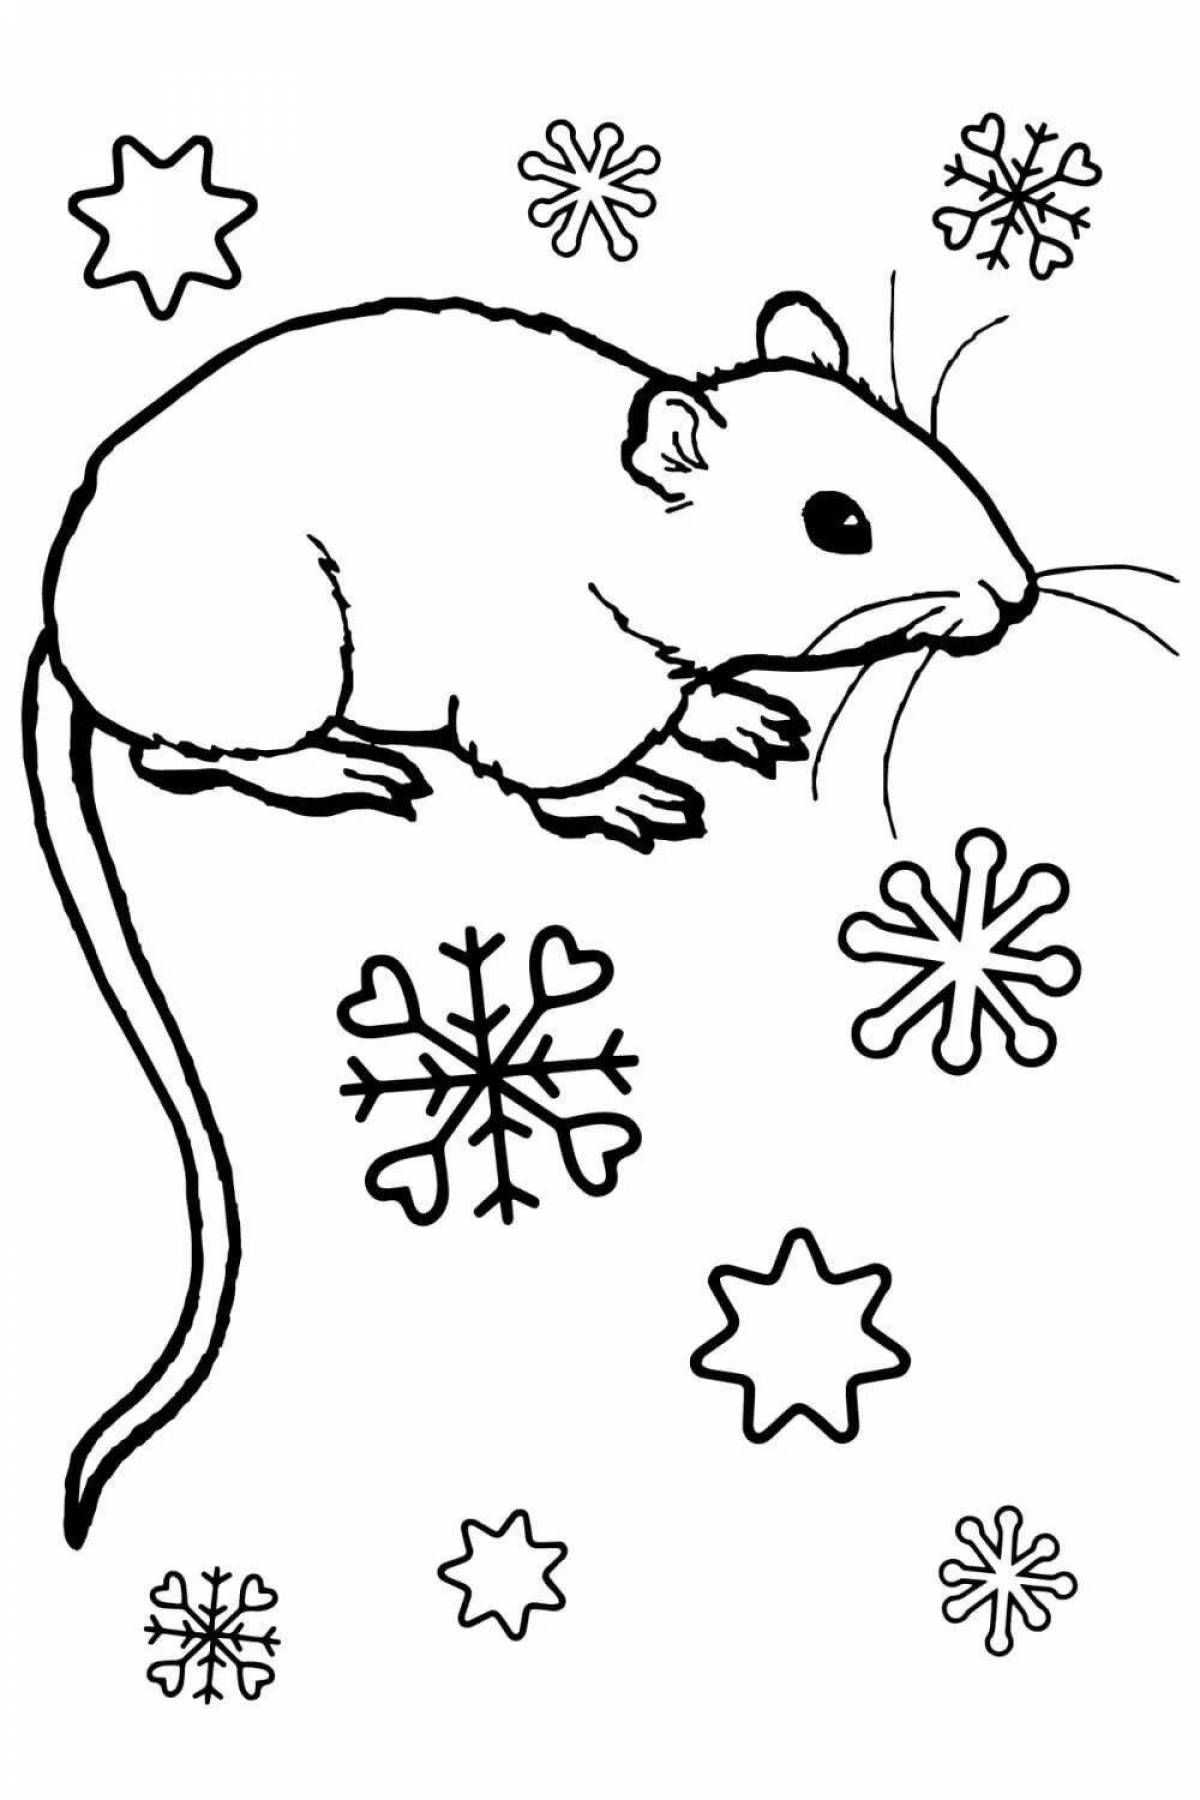 Bright mouse in winter